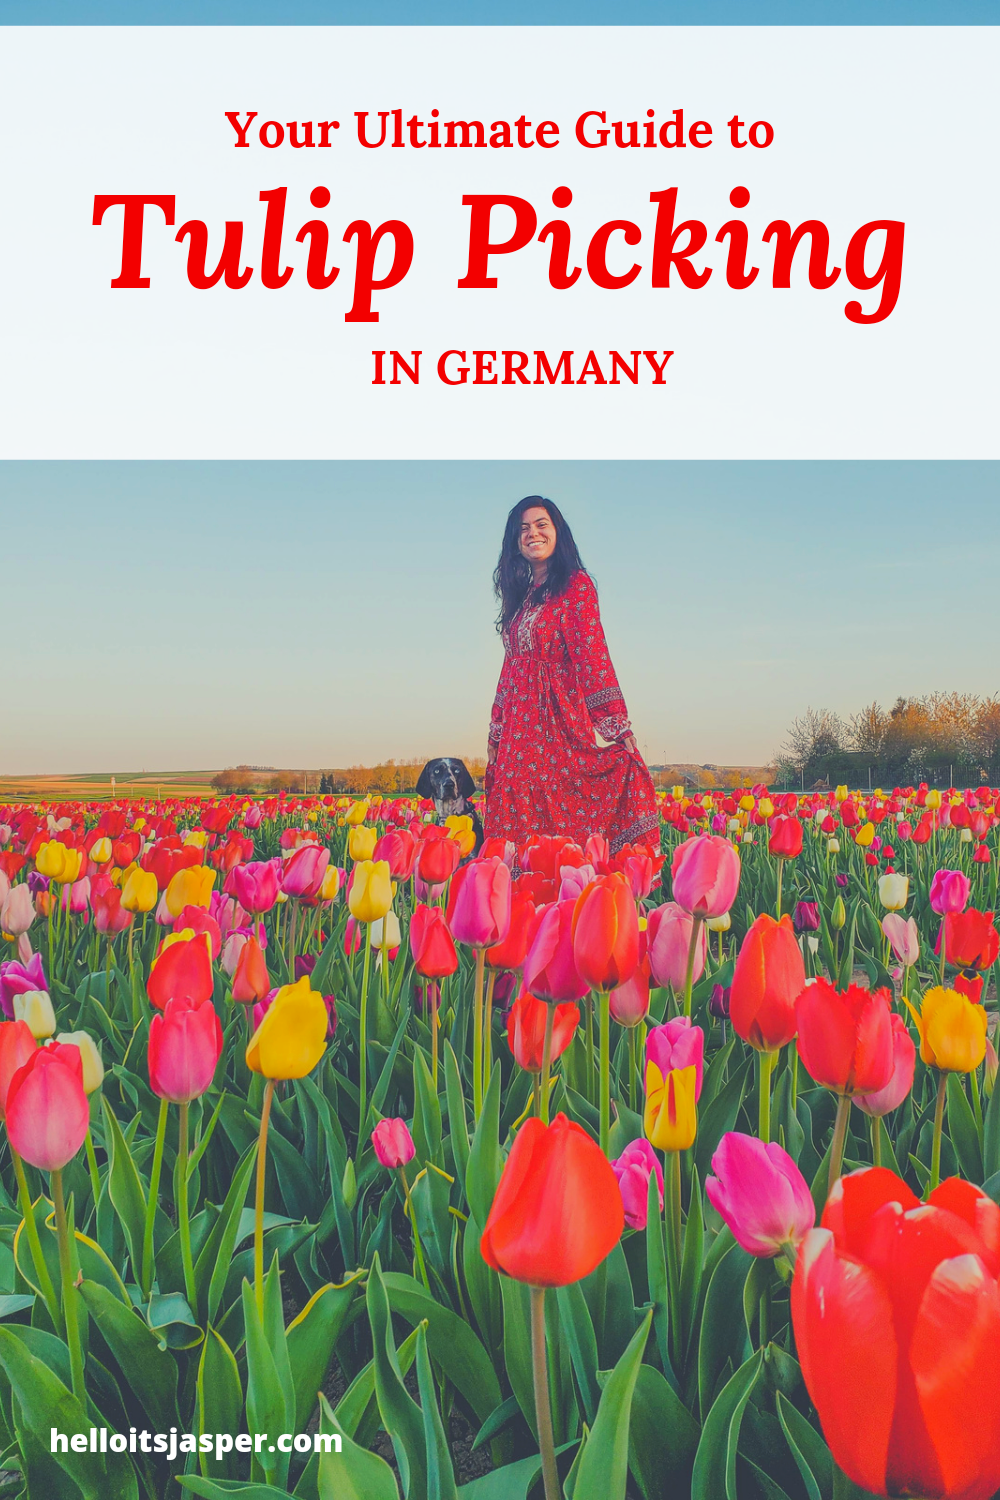 Your Ultimate Guide to Picking Tulips in Germany